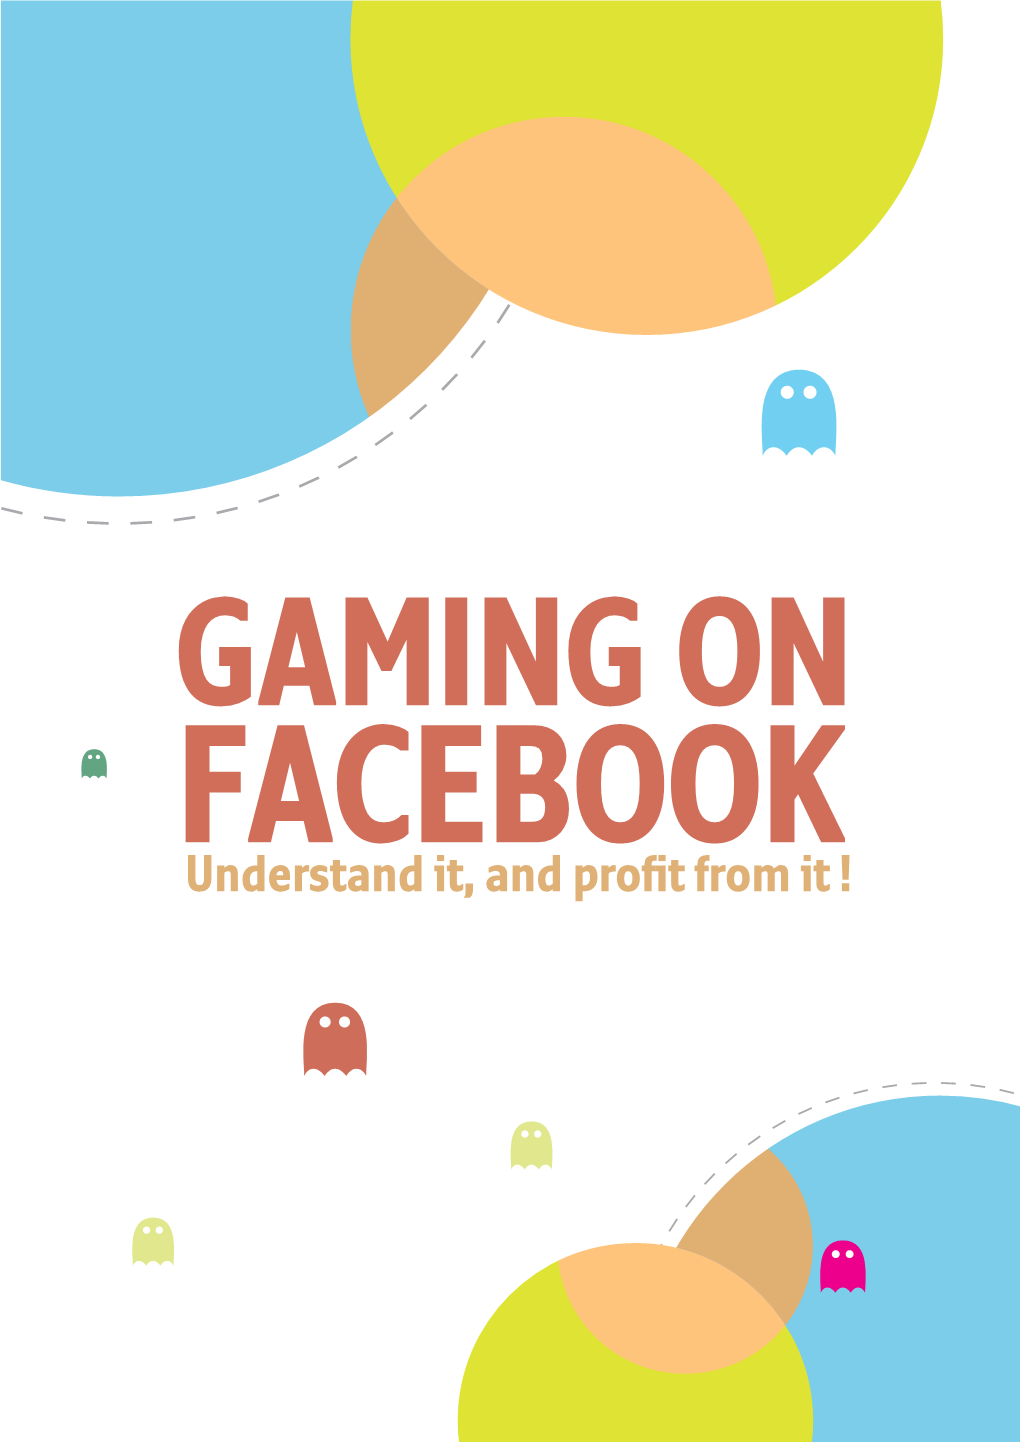 GAMING on FACEBOOK Understand It, and Profit from It ! 1.OVERVIEW - Gaming on Facebook 200 Million Potential Gamers, 3.6$ Billion Market in 2012